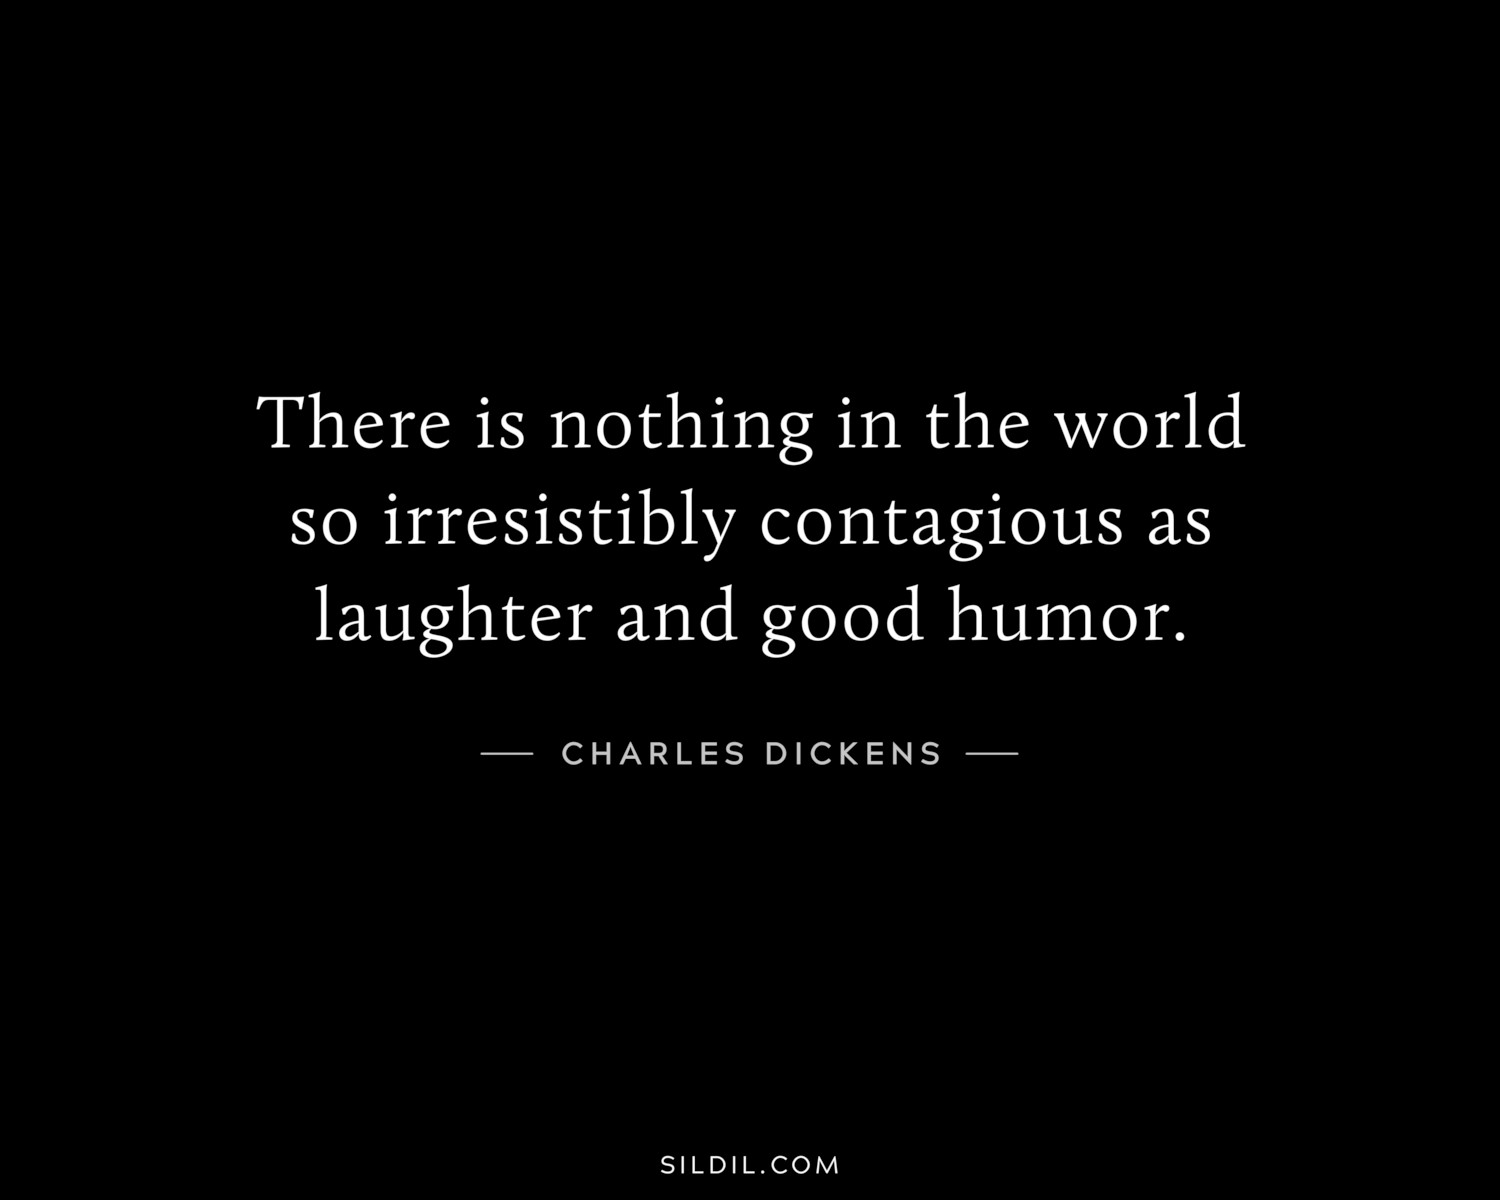 There is nothing in the world so irresistibly contagious as laughter and good humor.